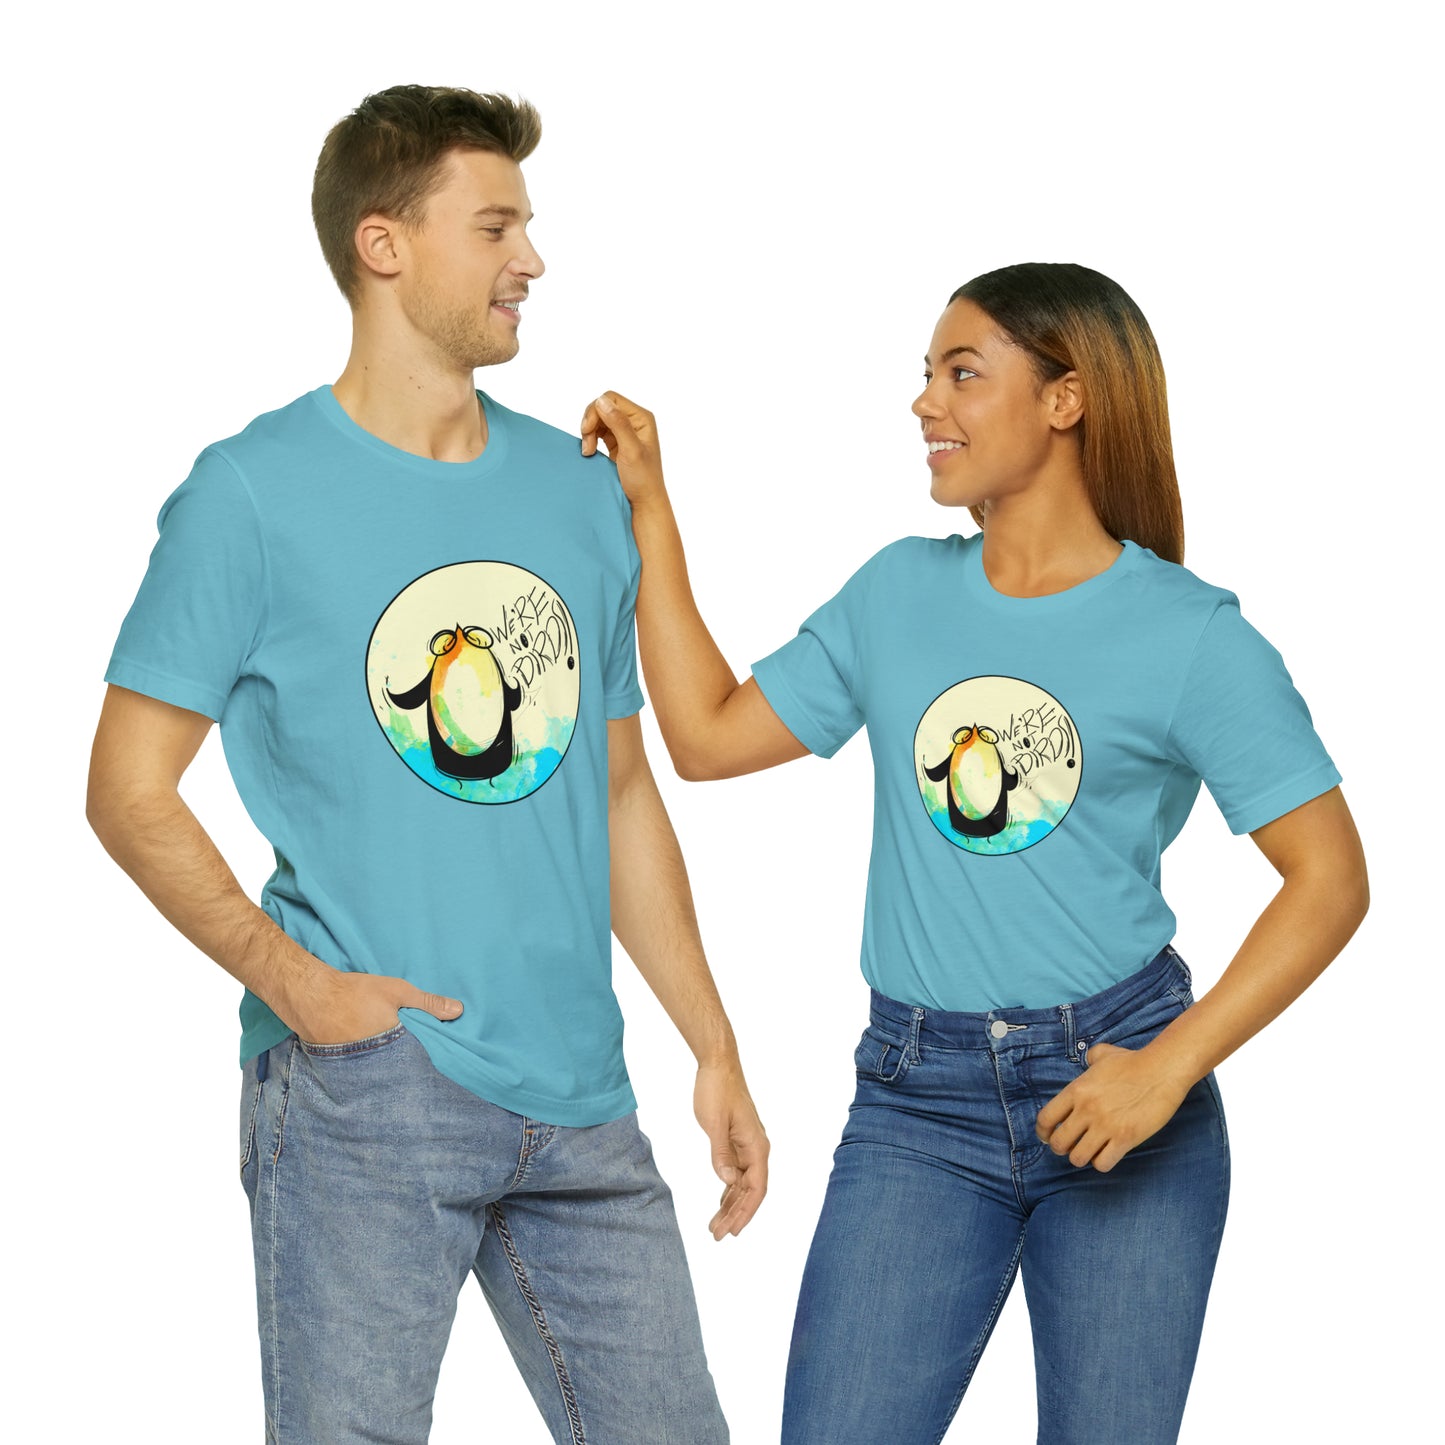 We're Not Birds! Jersey Short Sleeve Tee T-Shirt Printify Turquoise S 